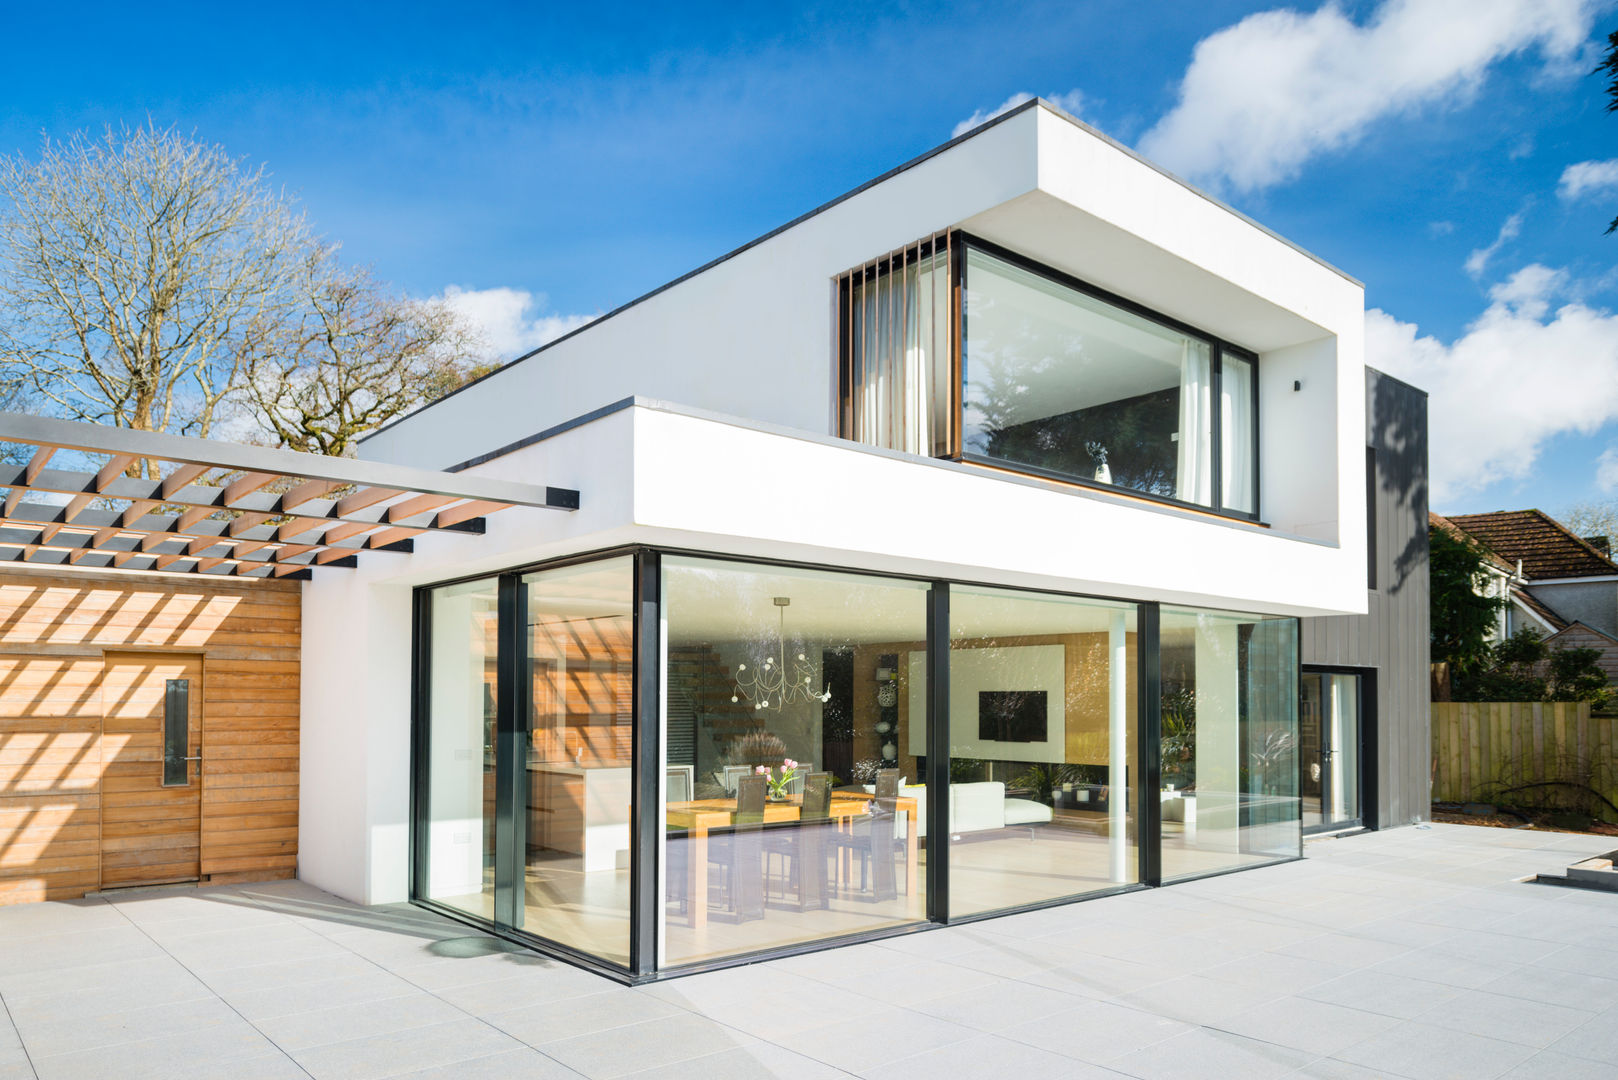 White Oaks Exterior Barc Architects Modern houses contemporary,modern,bold,glass,render,flat roof